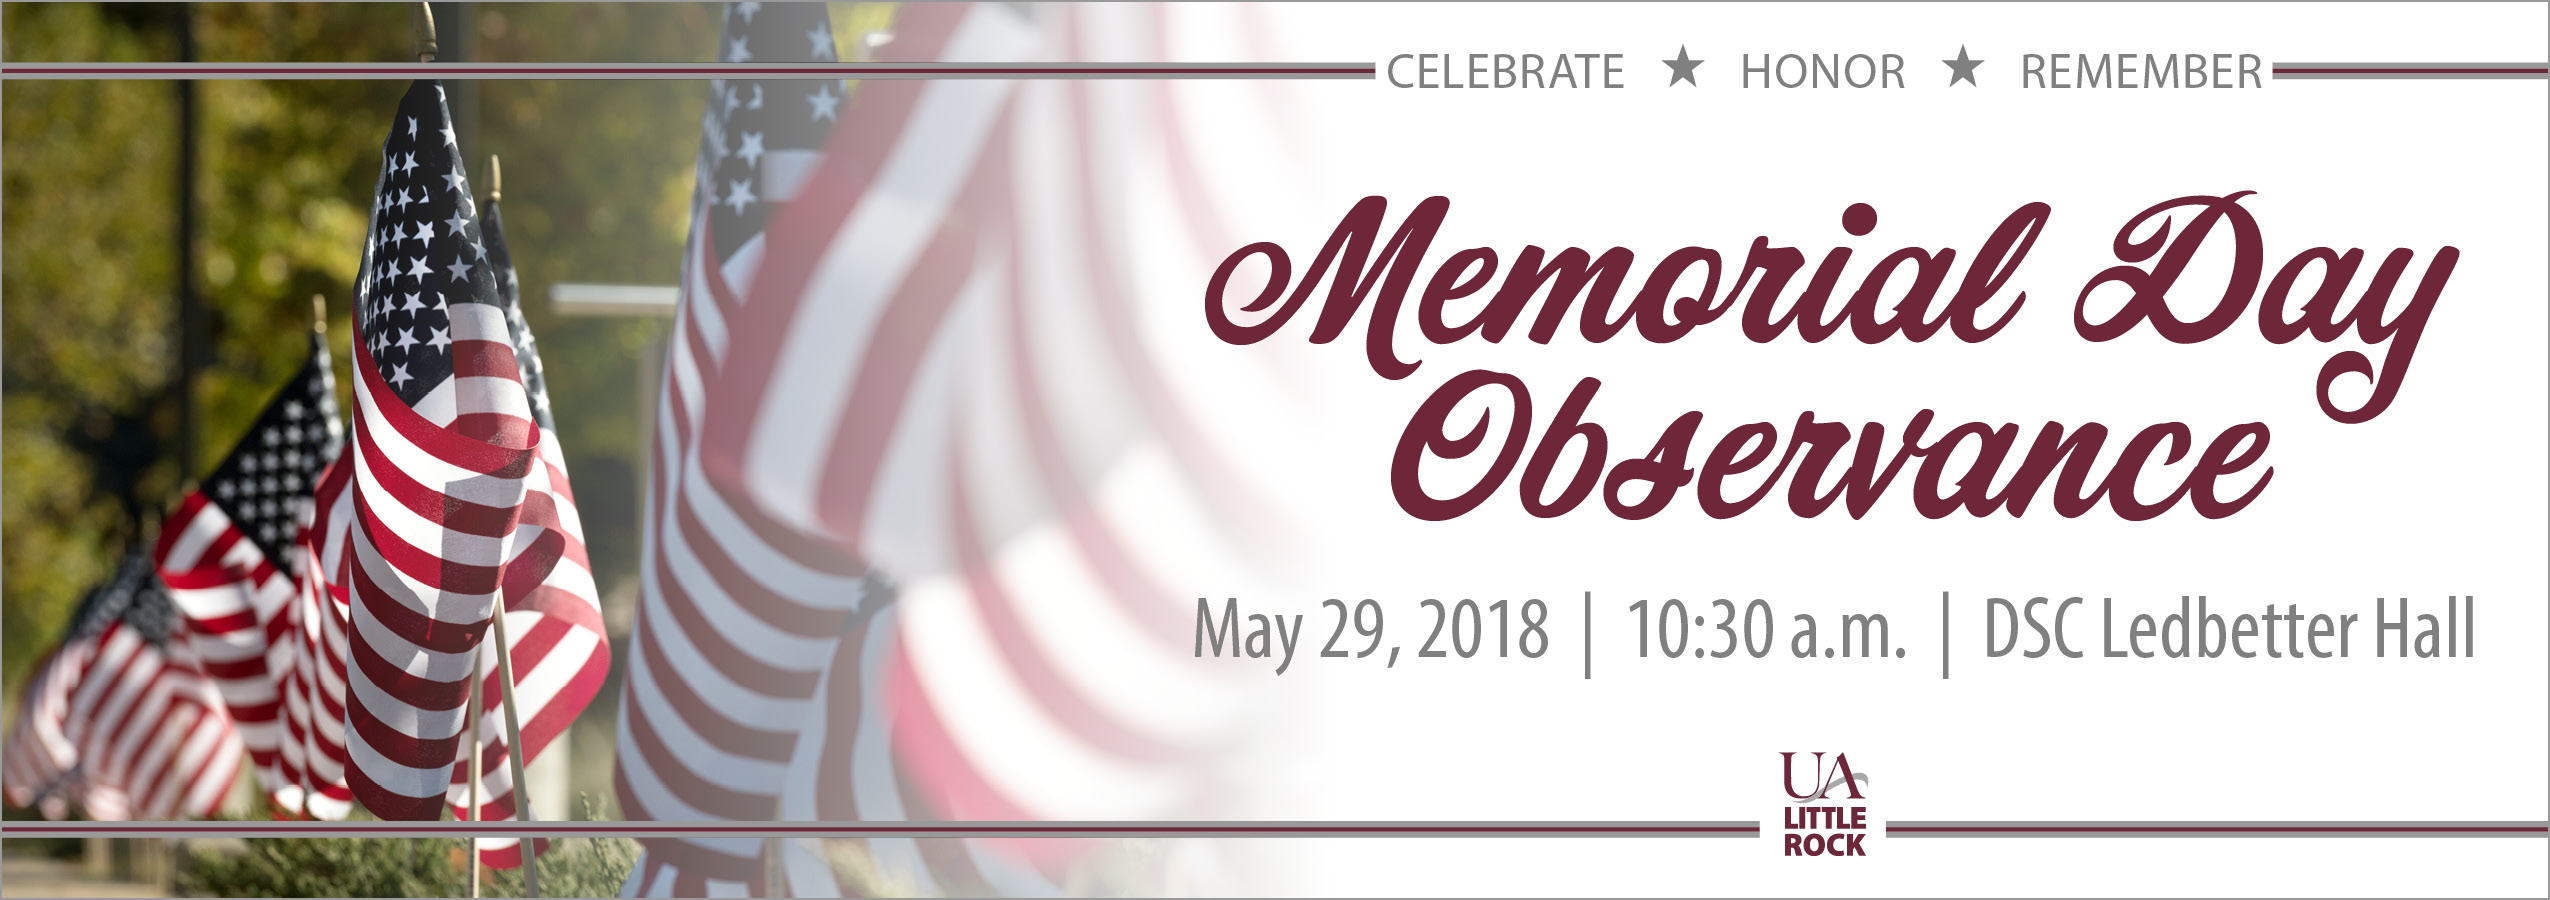 The University of Arkansas at Little Rock will hold a special Memorial Day observance in honor of those who died while serving our country at 10:30 a.m. on Tuesday, May 29, at the Donaghey Student Center Ledbetter Hall.